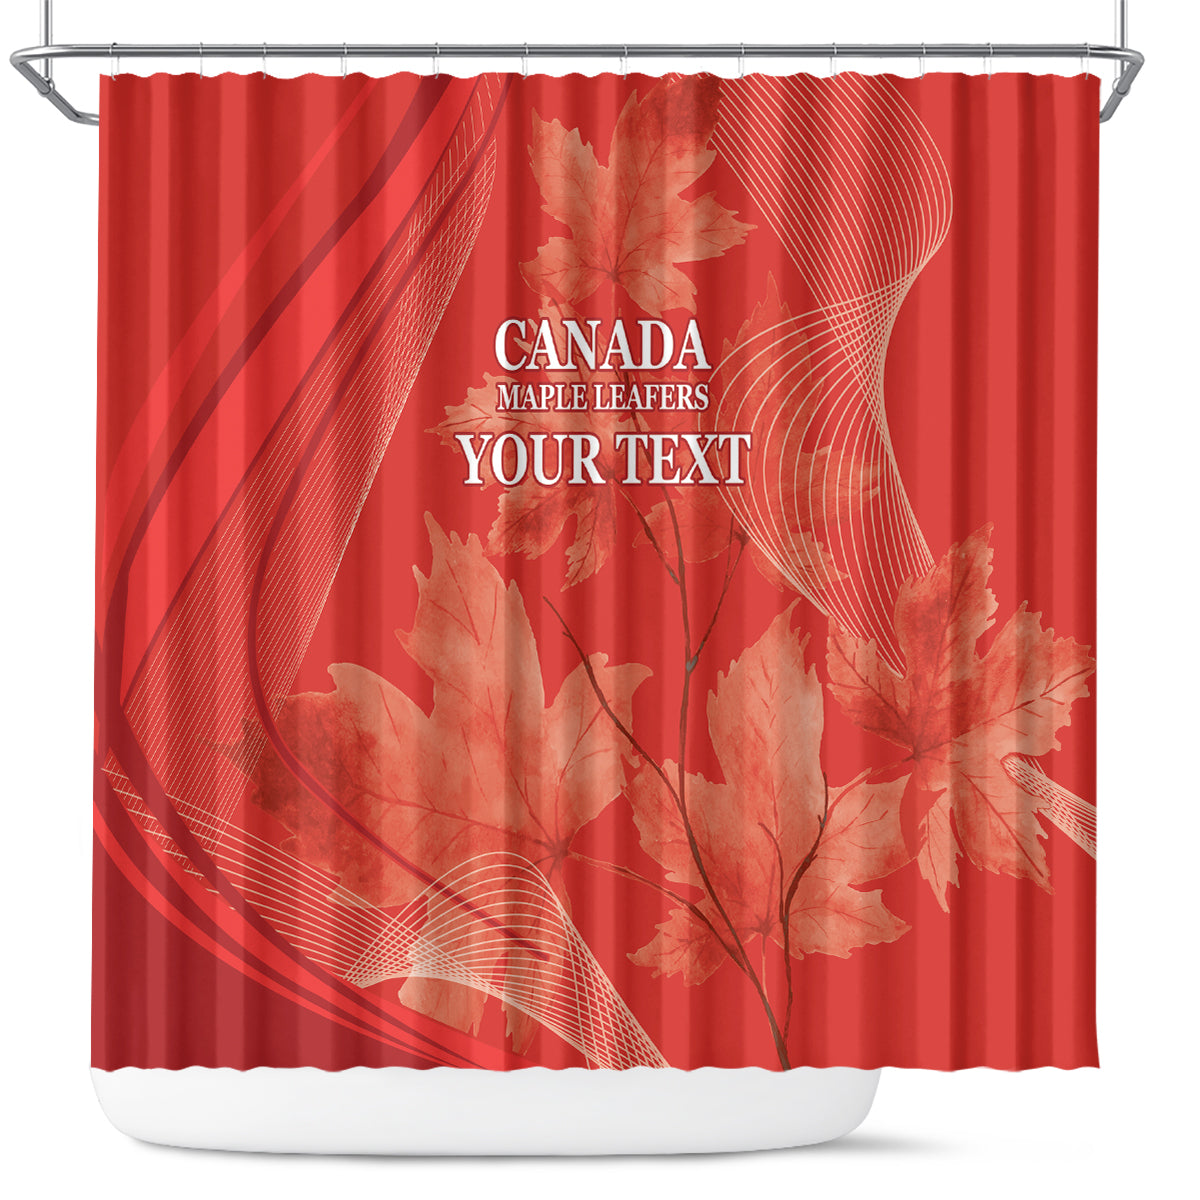 Canada Cricket World Cup 2024 Shower Curtain Maple Leafers Make Champions